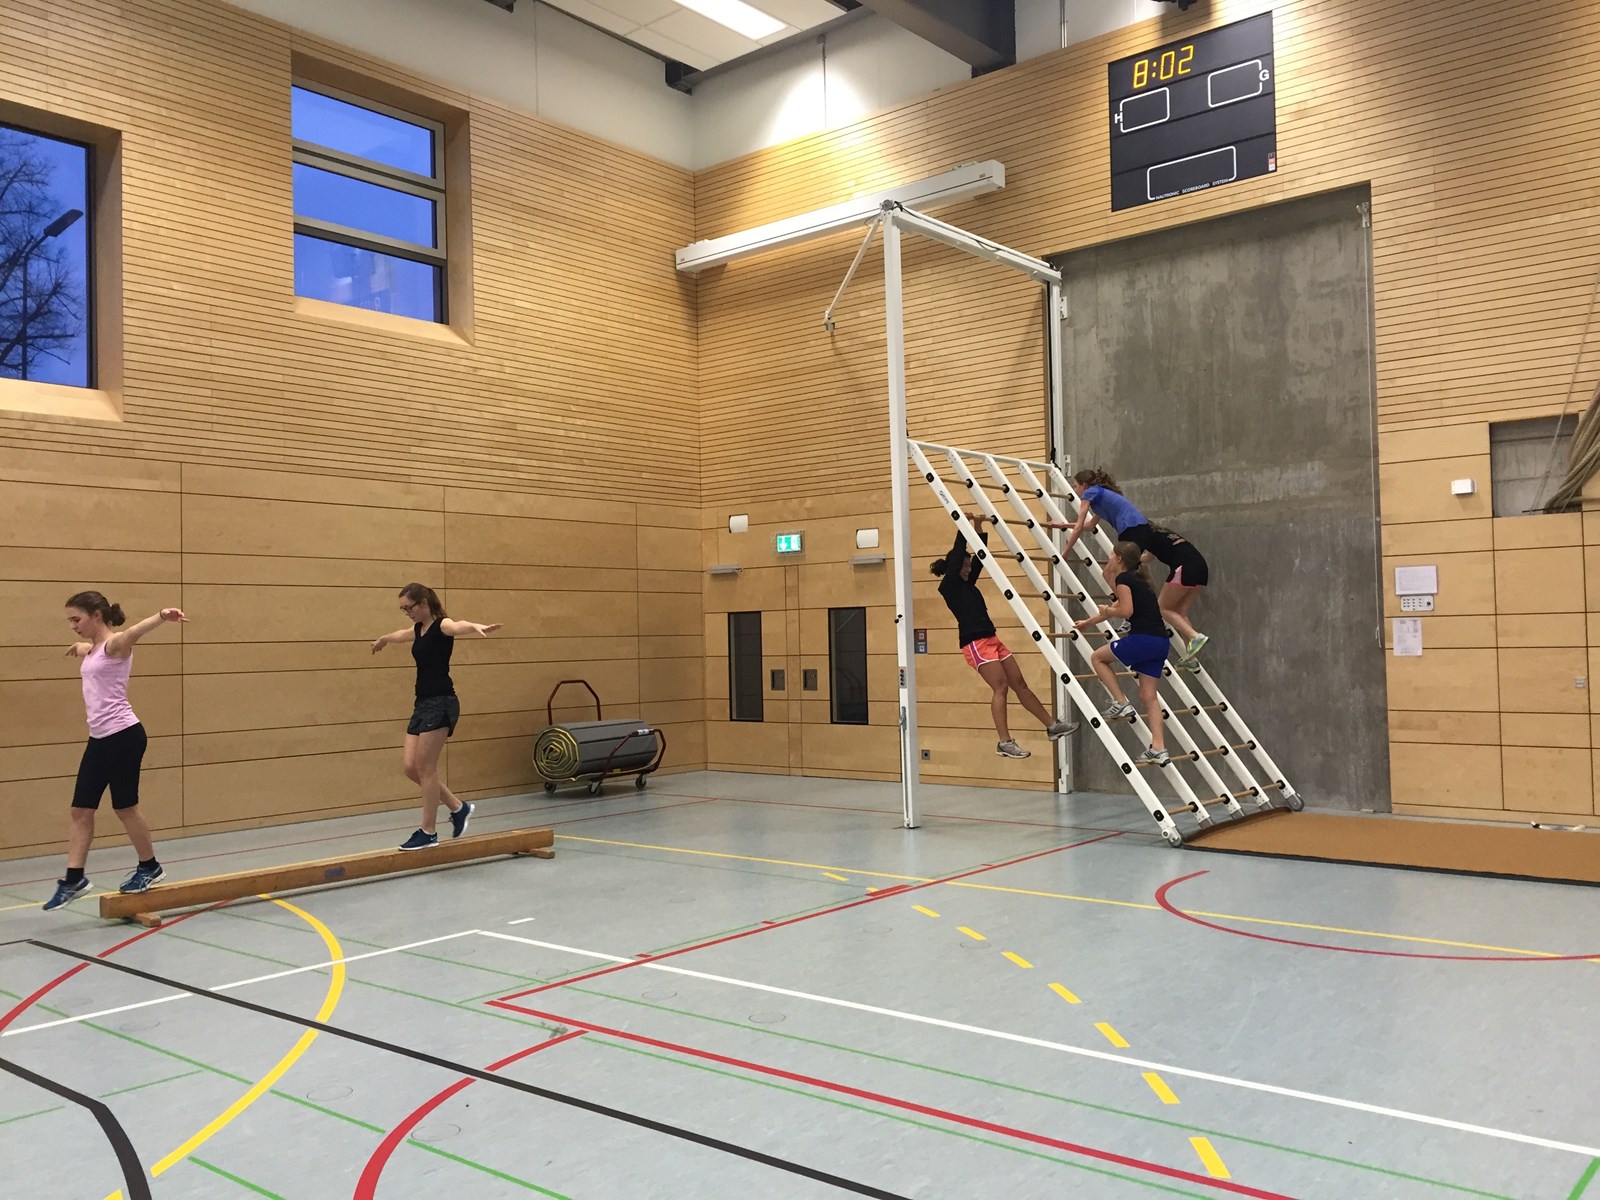 Learning Readiness Physical Education At The International School Of Dusseldorf Physed Rocks